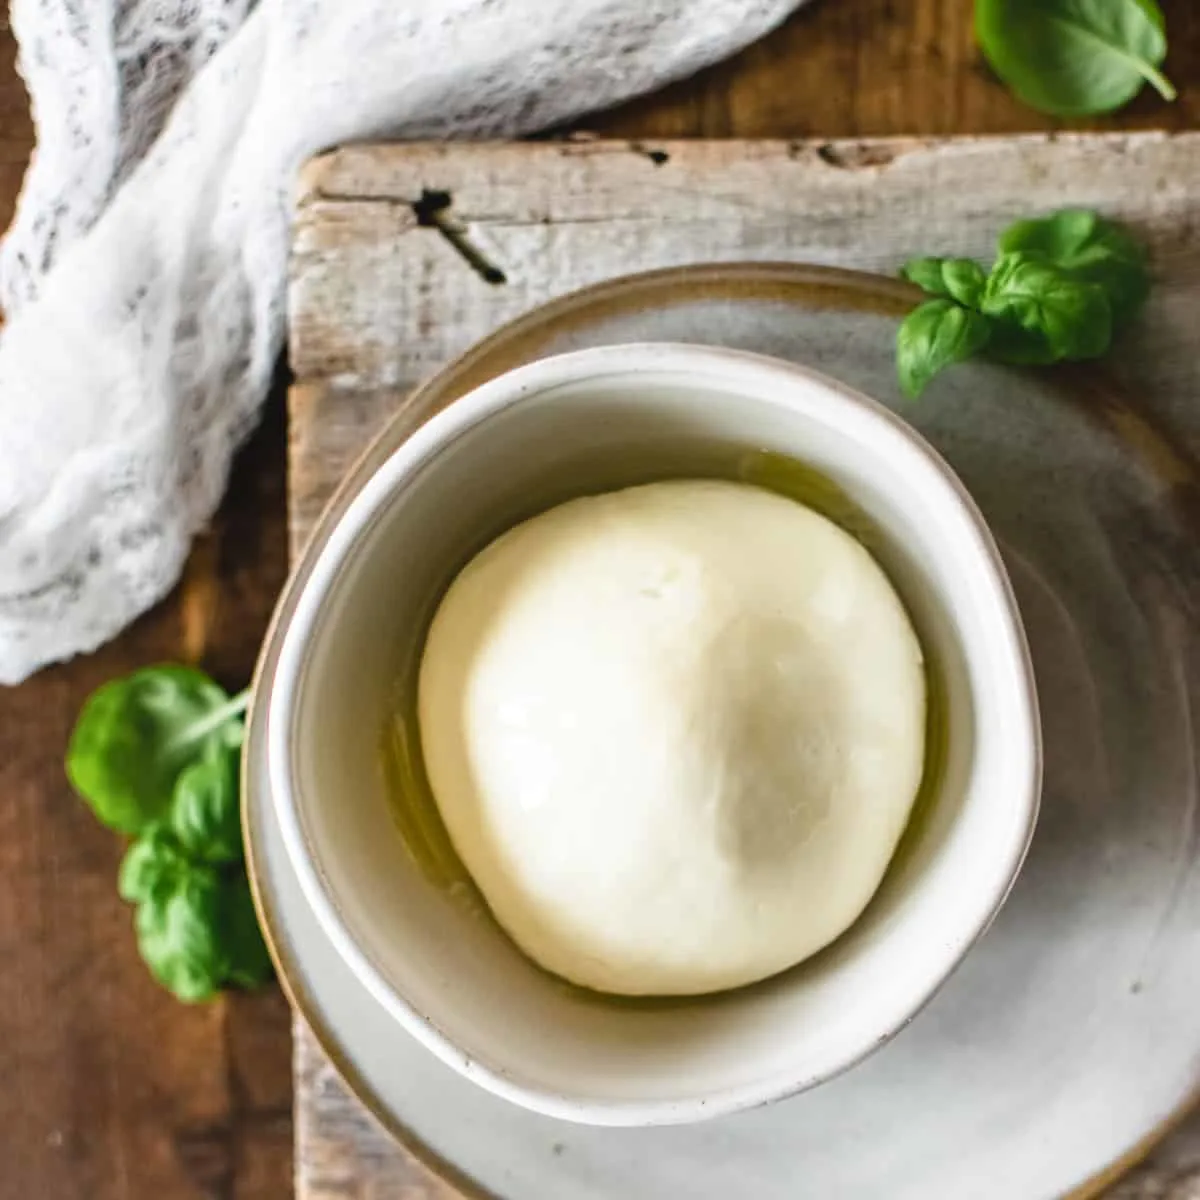 Ball of mozzarella cheese with basil and olive oil next to cheesecloth.